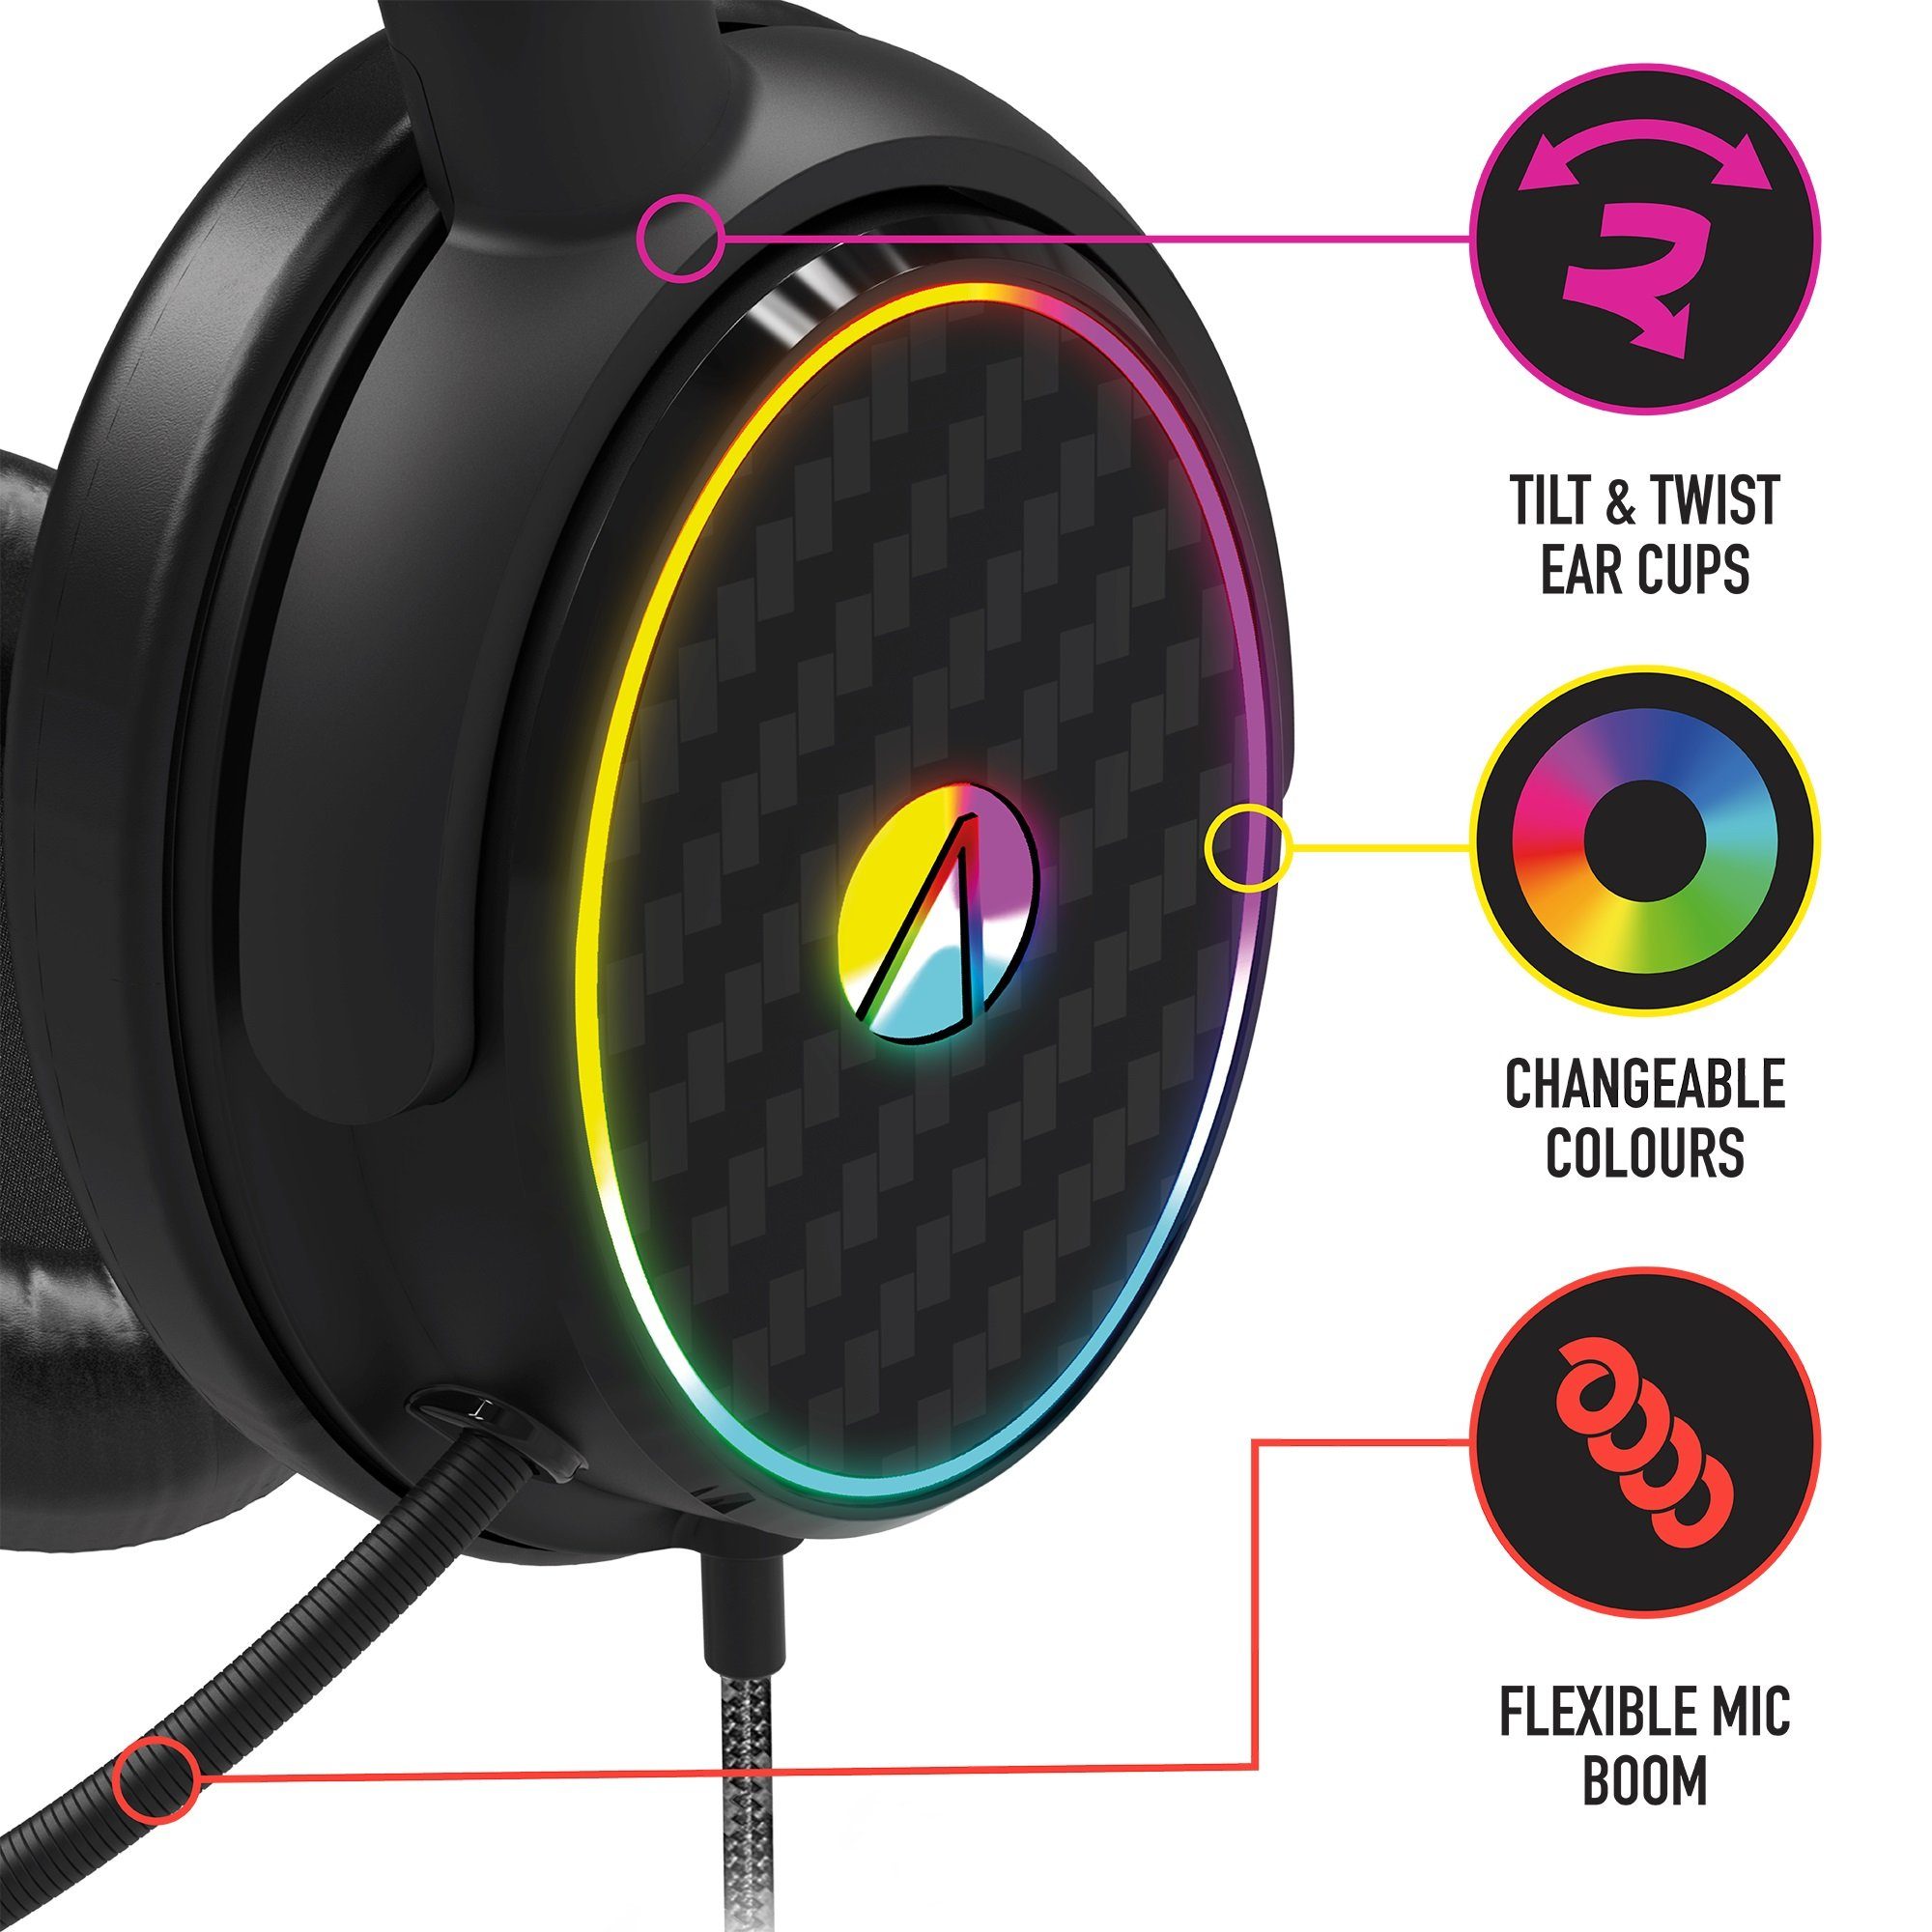 Stealth Stereo Gaming Beleuchtung C6-100 Gaming-Headset (Plastikfreie Headset LED Verpackung) mit